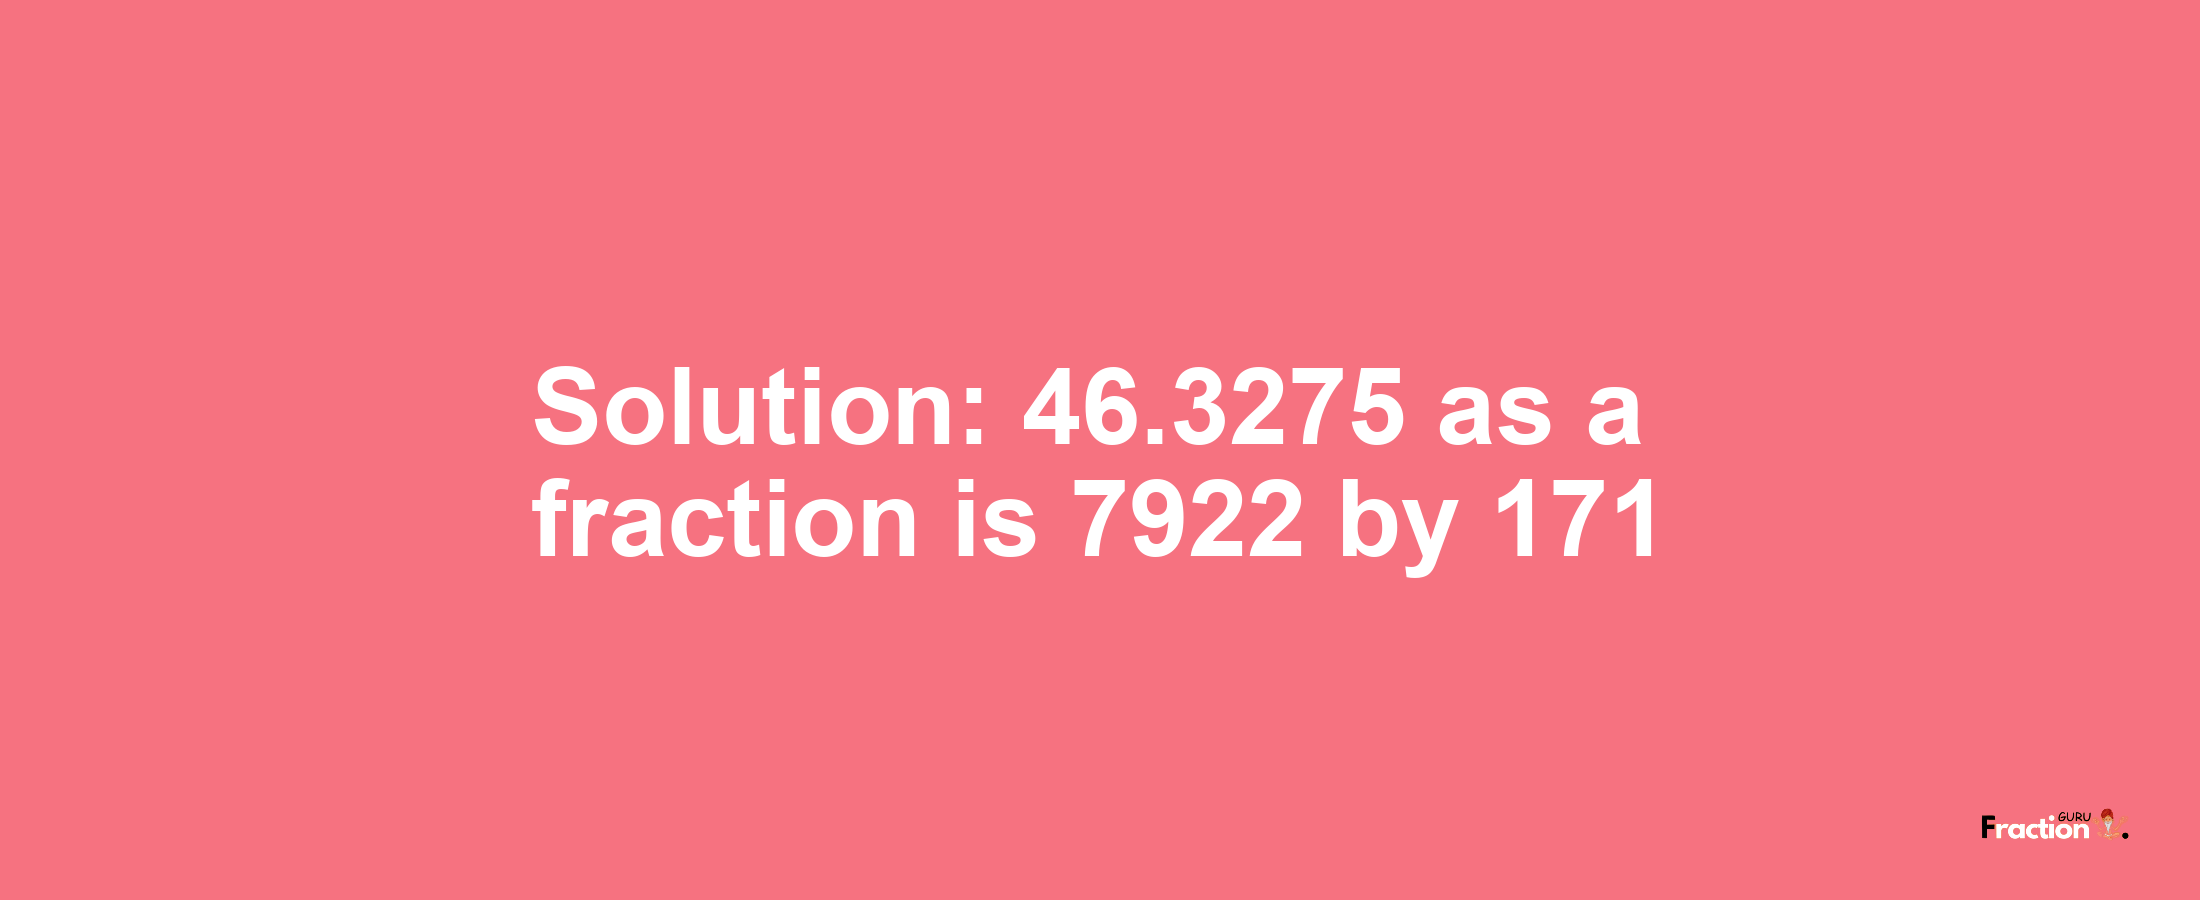 Solution:46.3275 as a fraction is 7922/171